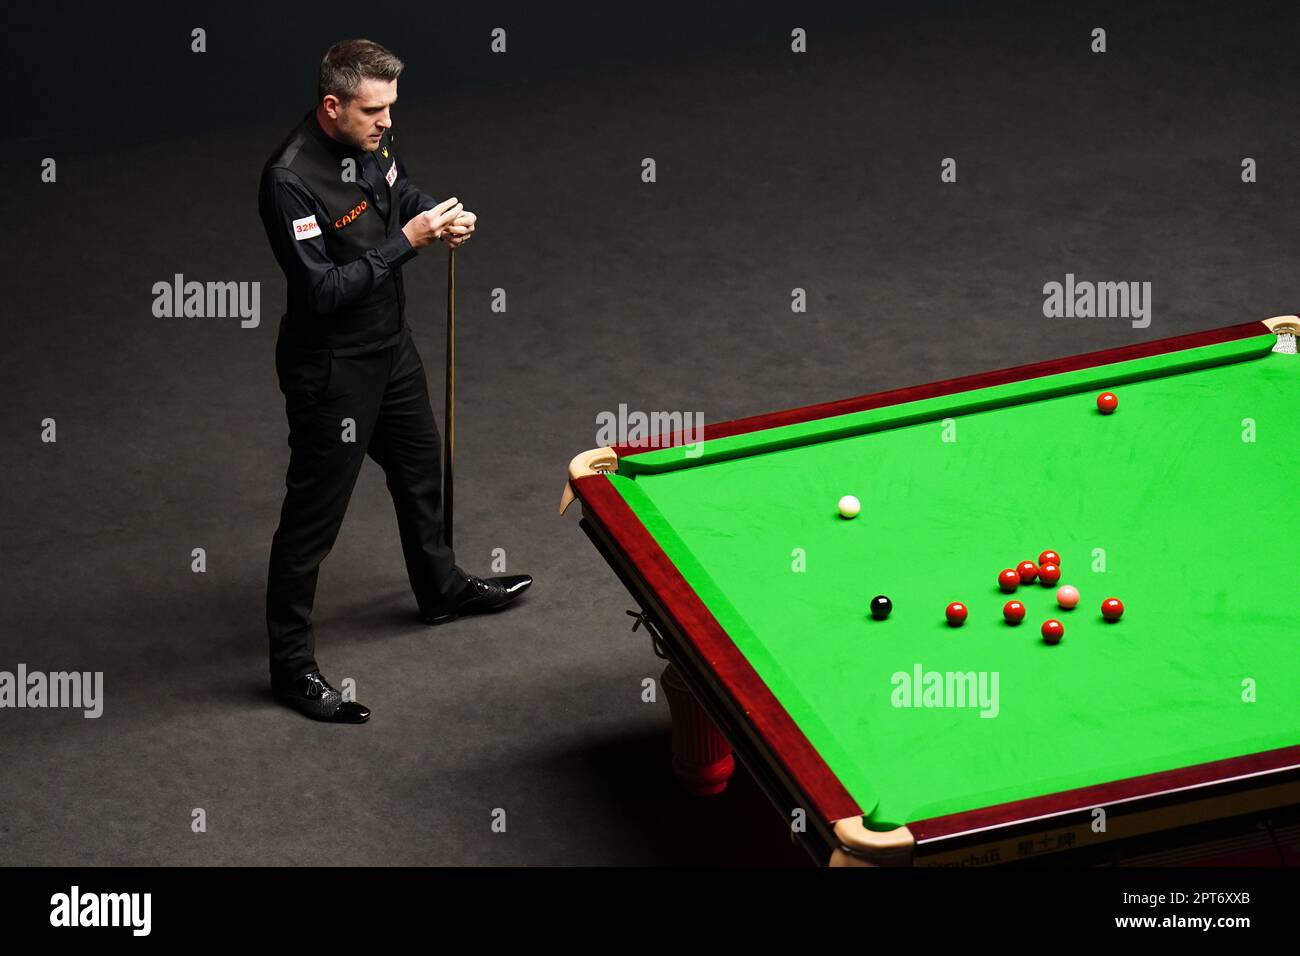 Mark Selby in action against Mark Allen (not pictured) on day thirteen of the Cazoo World Snooker Championship at the Crucible Theatre, Sheffield